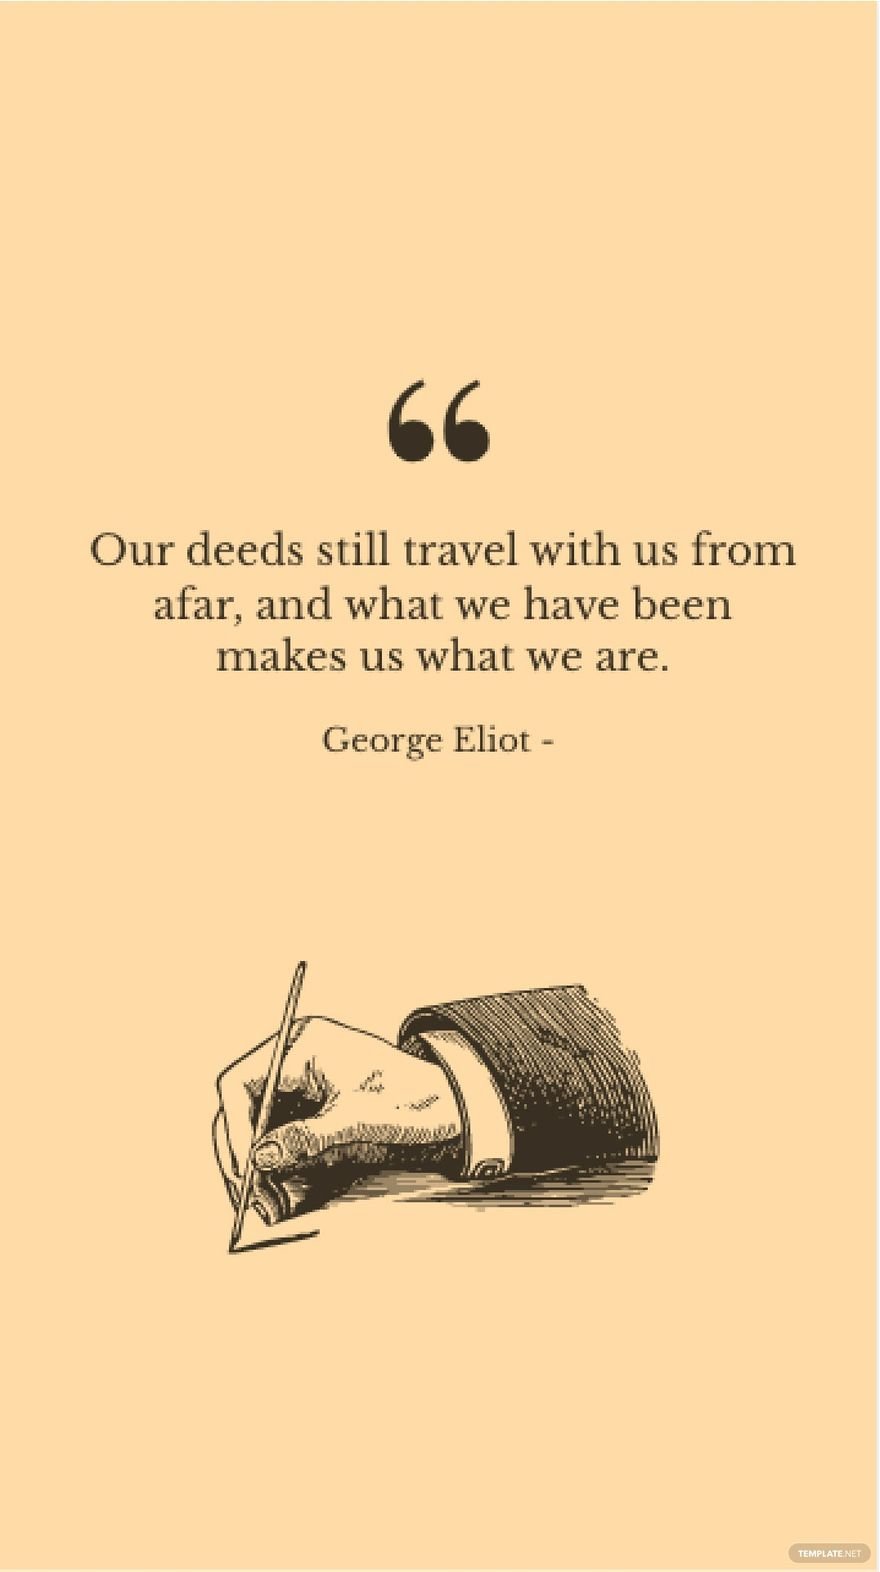 Free George Eliot - Our deeds still travel with us from afar, and what we have been makes us what we are. in JPG